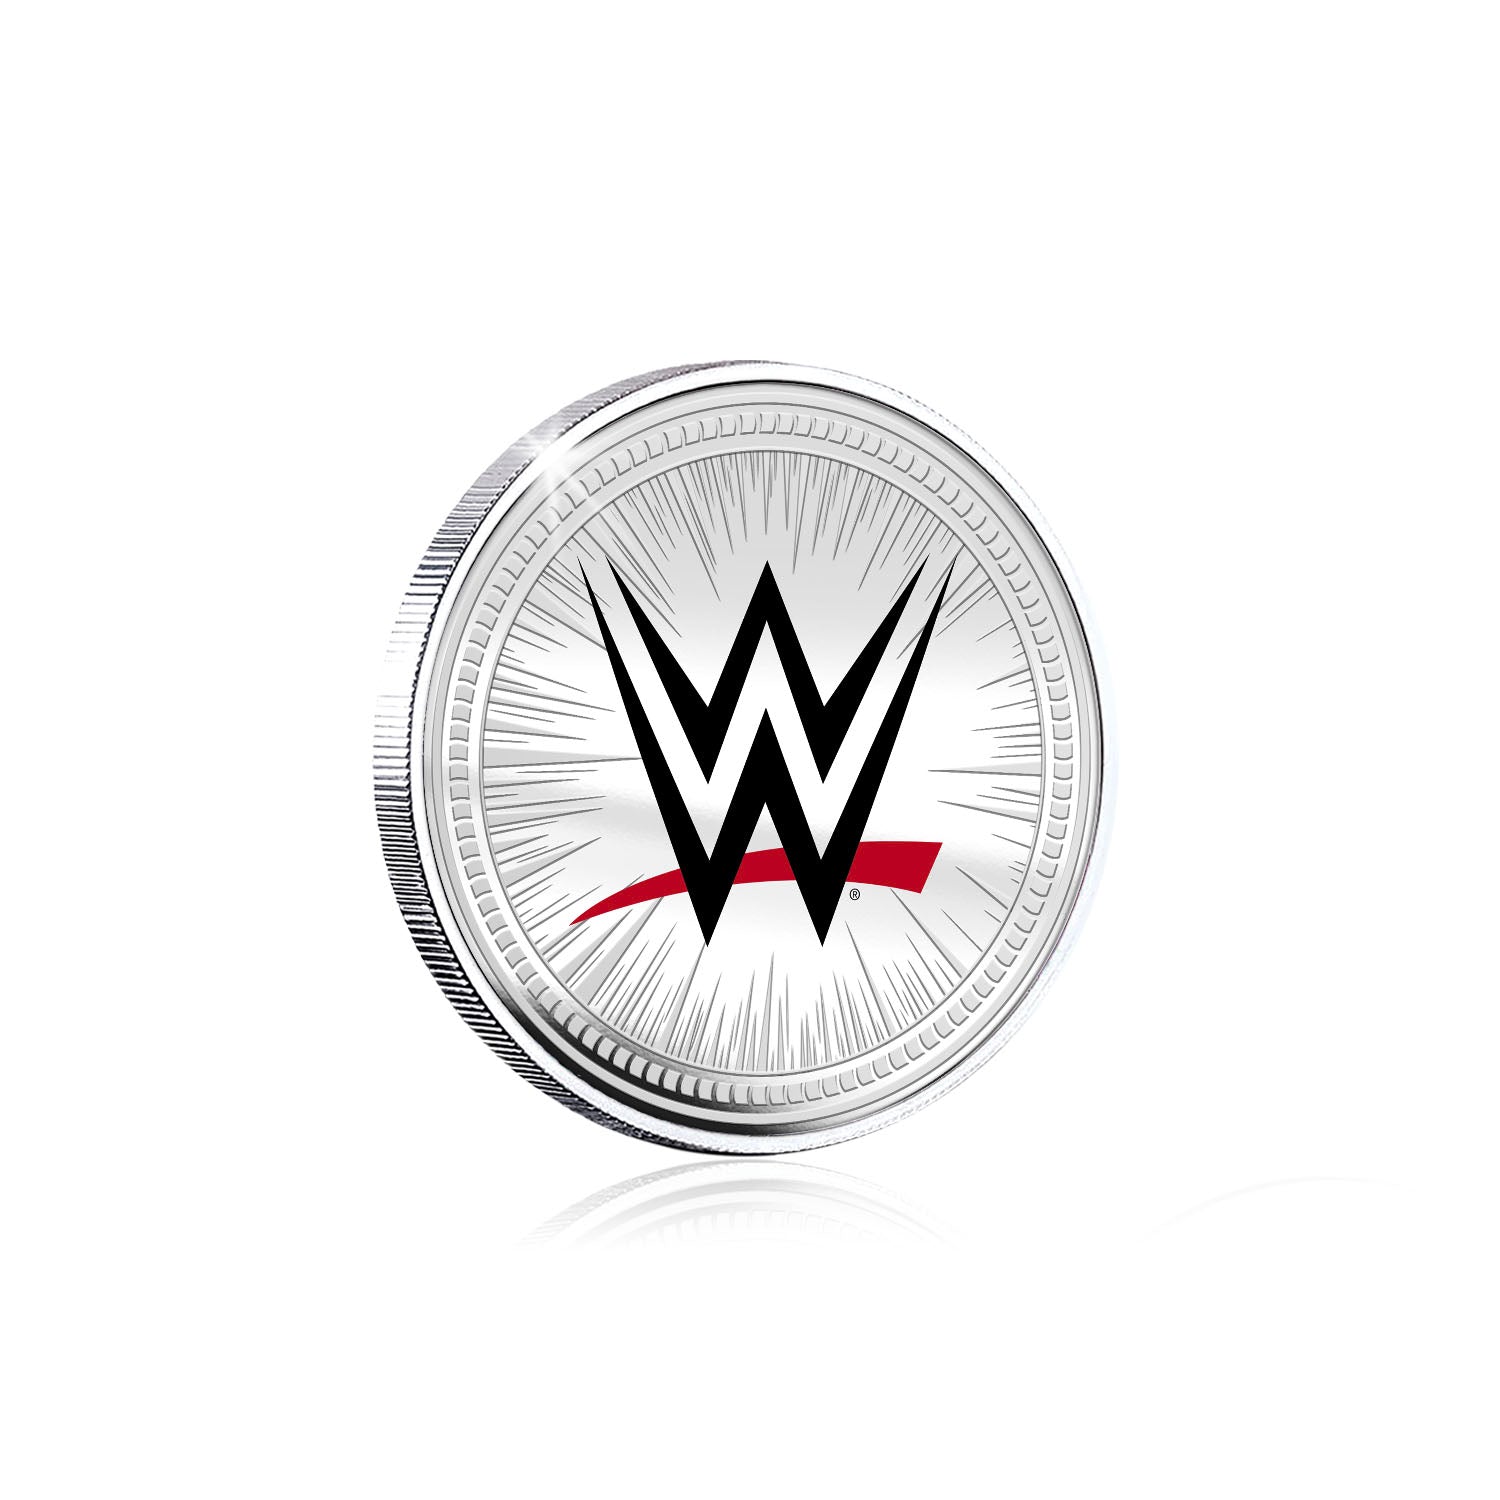 WWE Commemorative Collection - Drew McIntyre - 32mm Silver Plated Commemorative